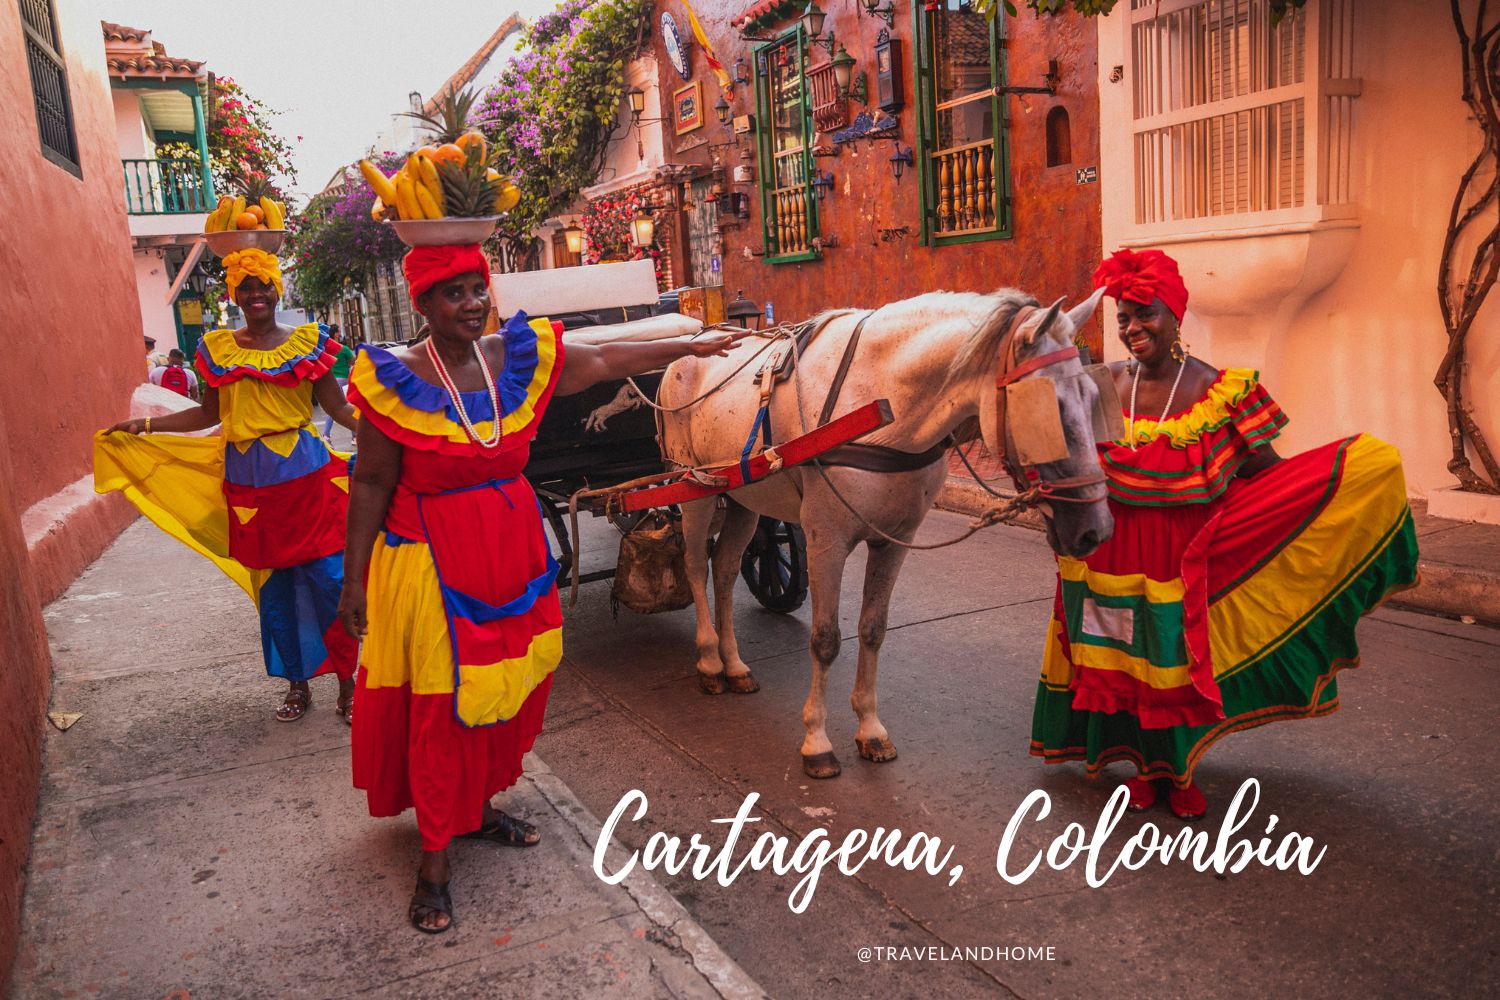 Cartagena Colombia Our colorful world